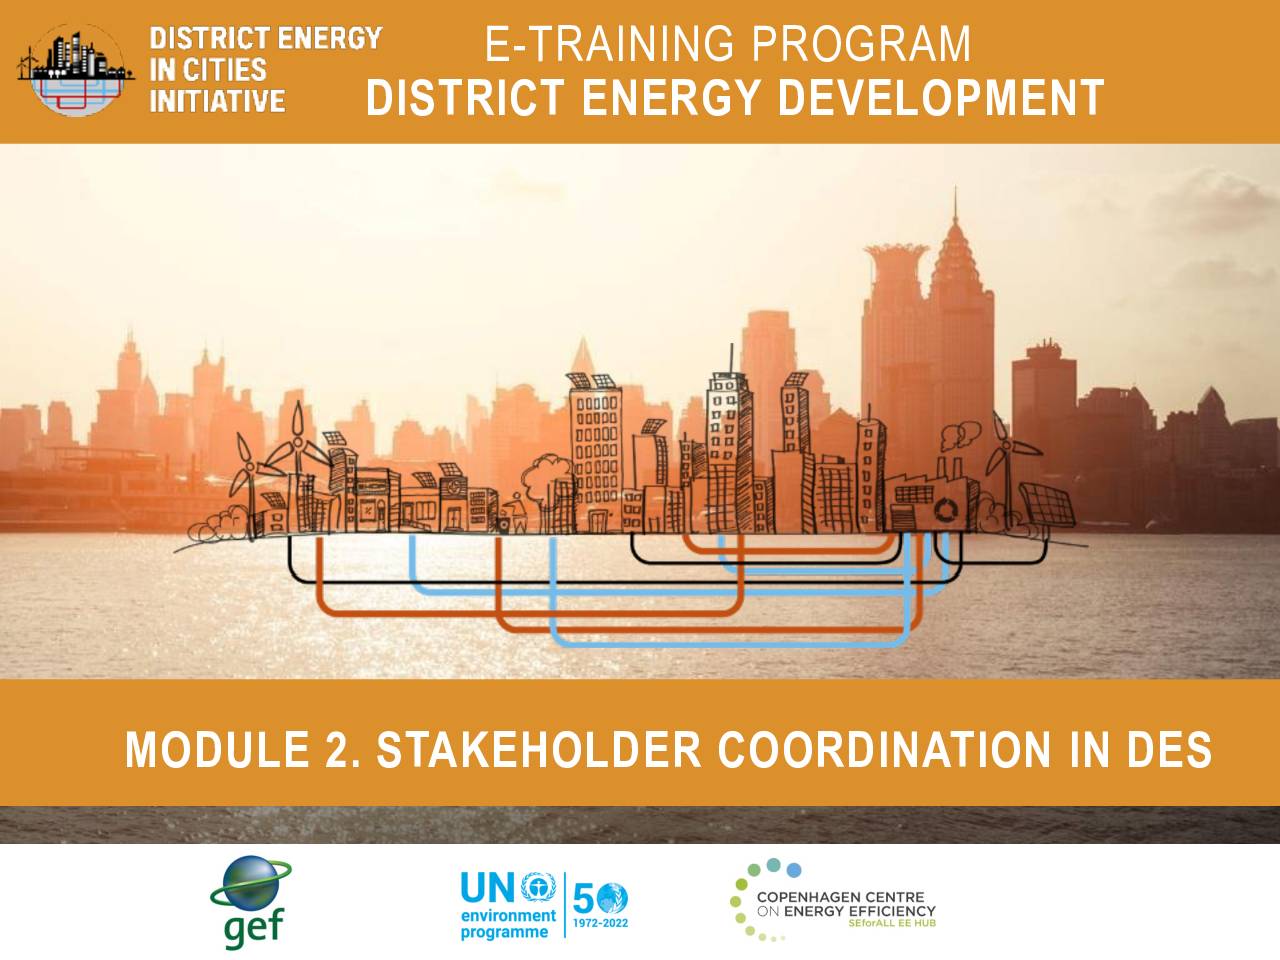 Module 2 – Stakeholder coordination for district energy development